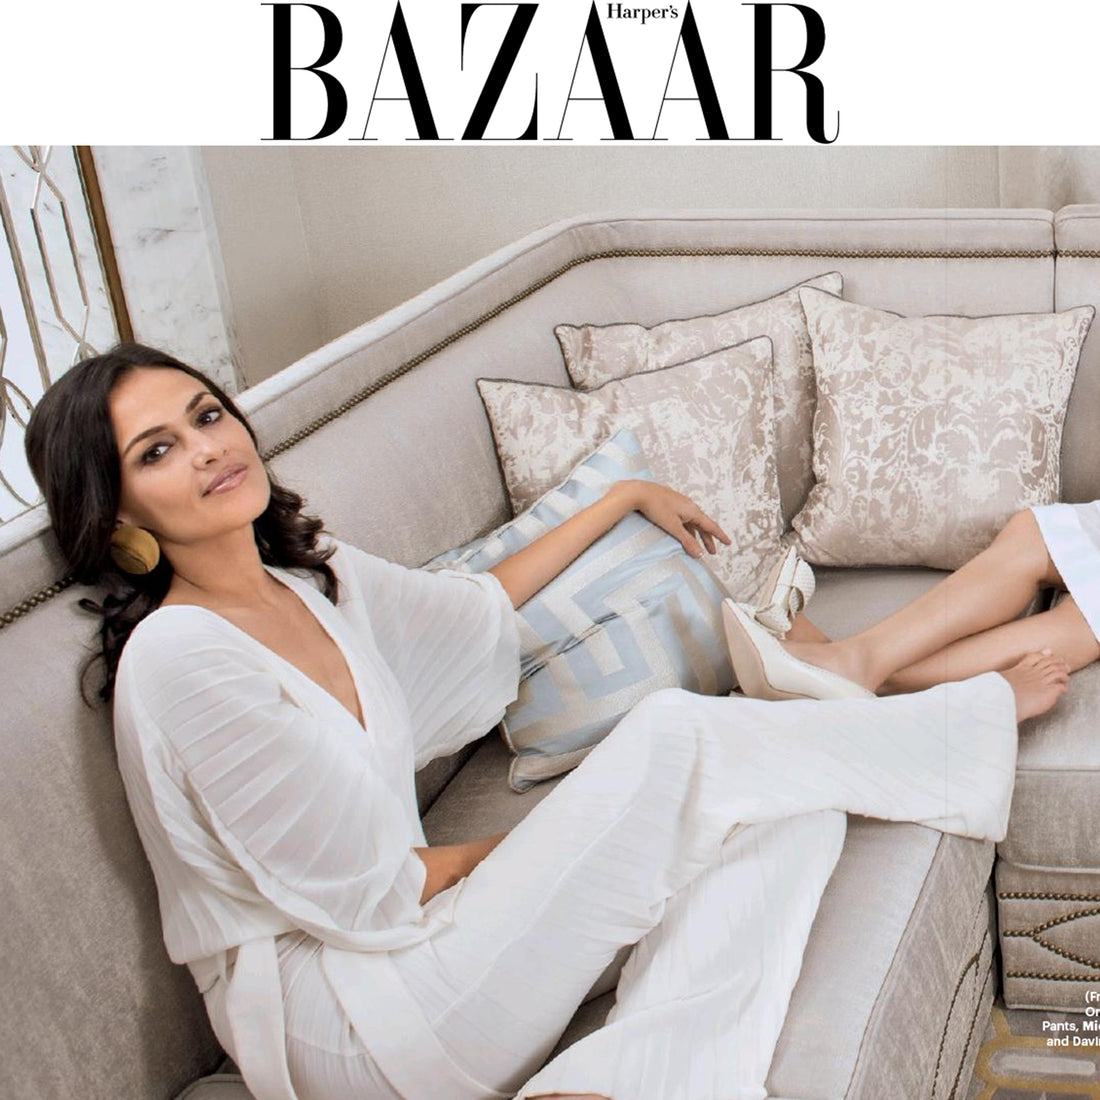 Tishani Doshi wears the SS18 Tropic Jumpsuit in Harpers Bazaar India Cover Story